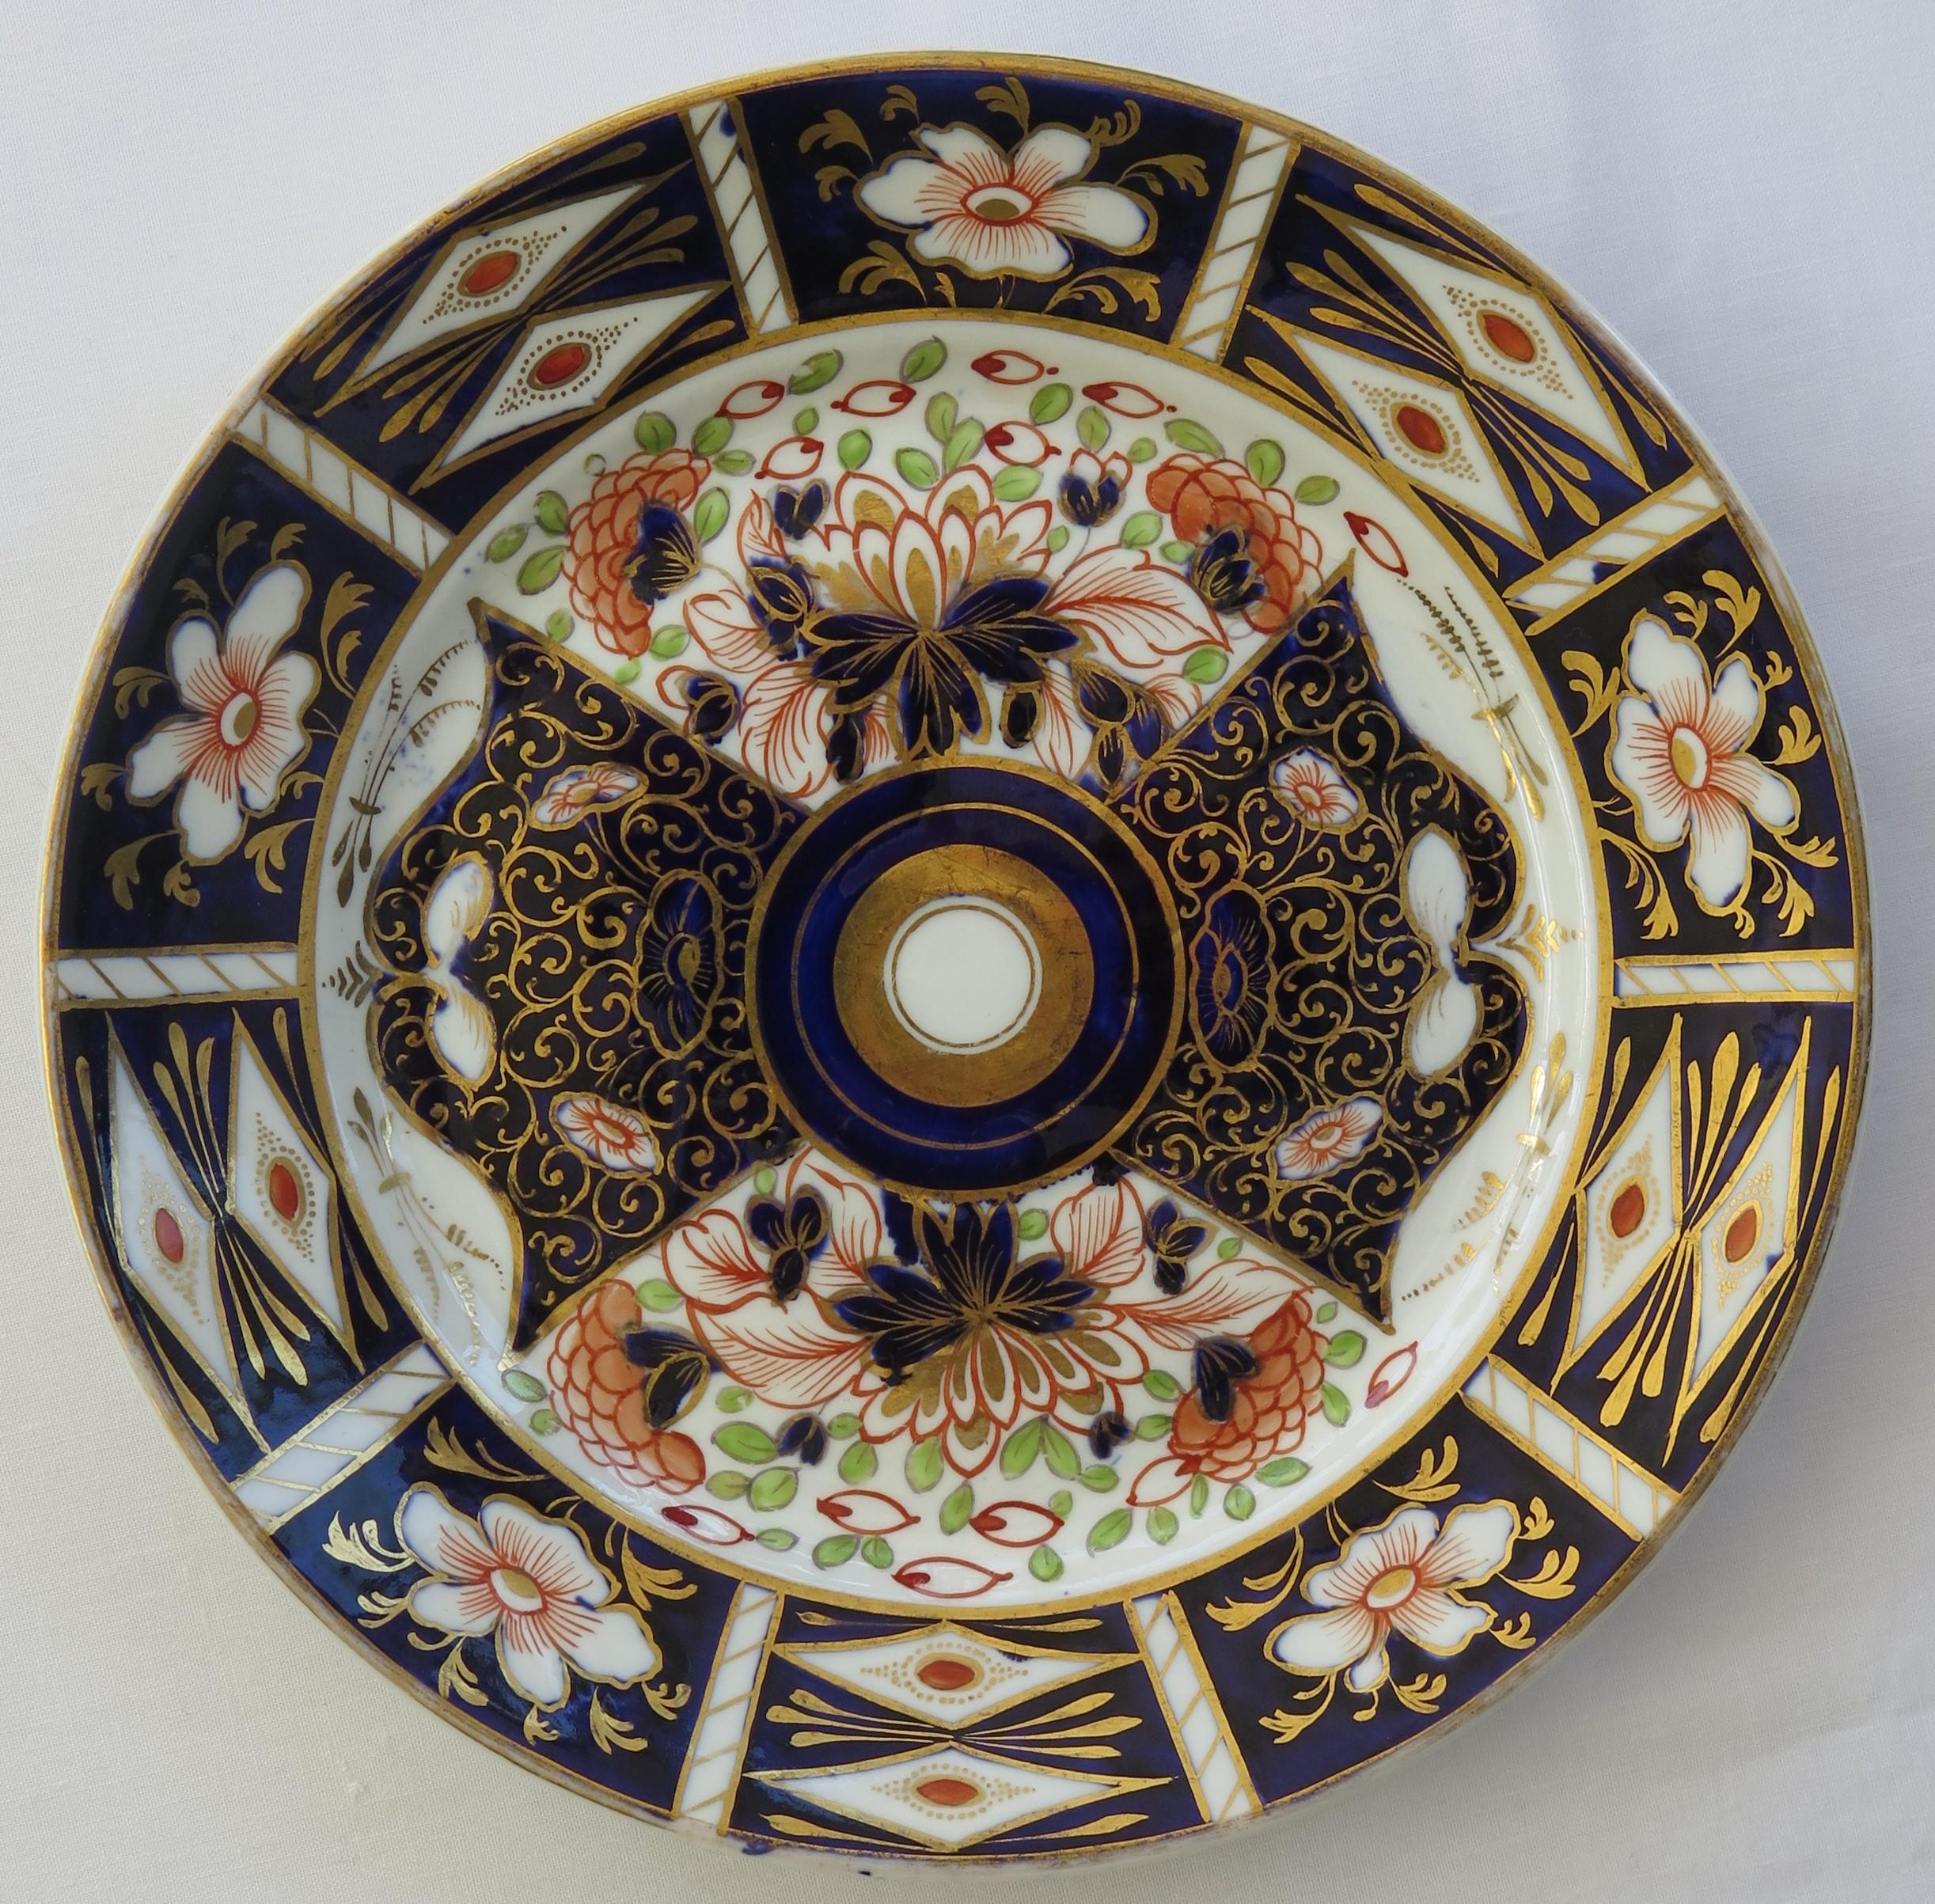 SIX Davenport Porcelain Plates Hand Painted and Gilded Pattern, Circa 1870 For Sale 4